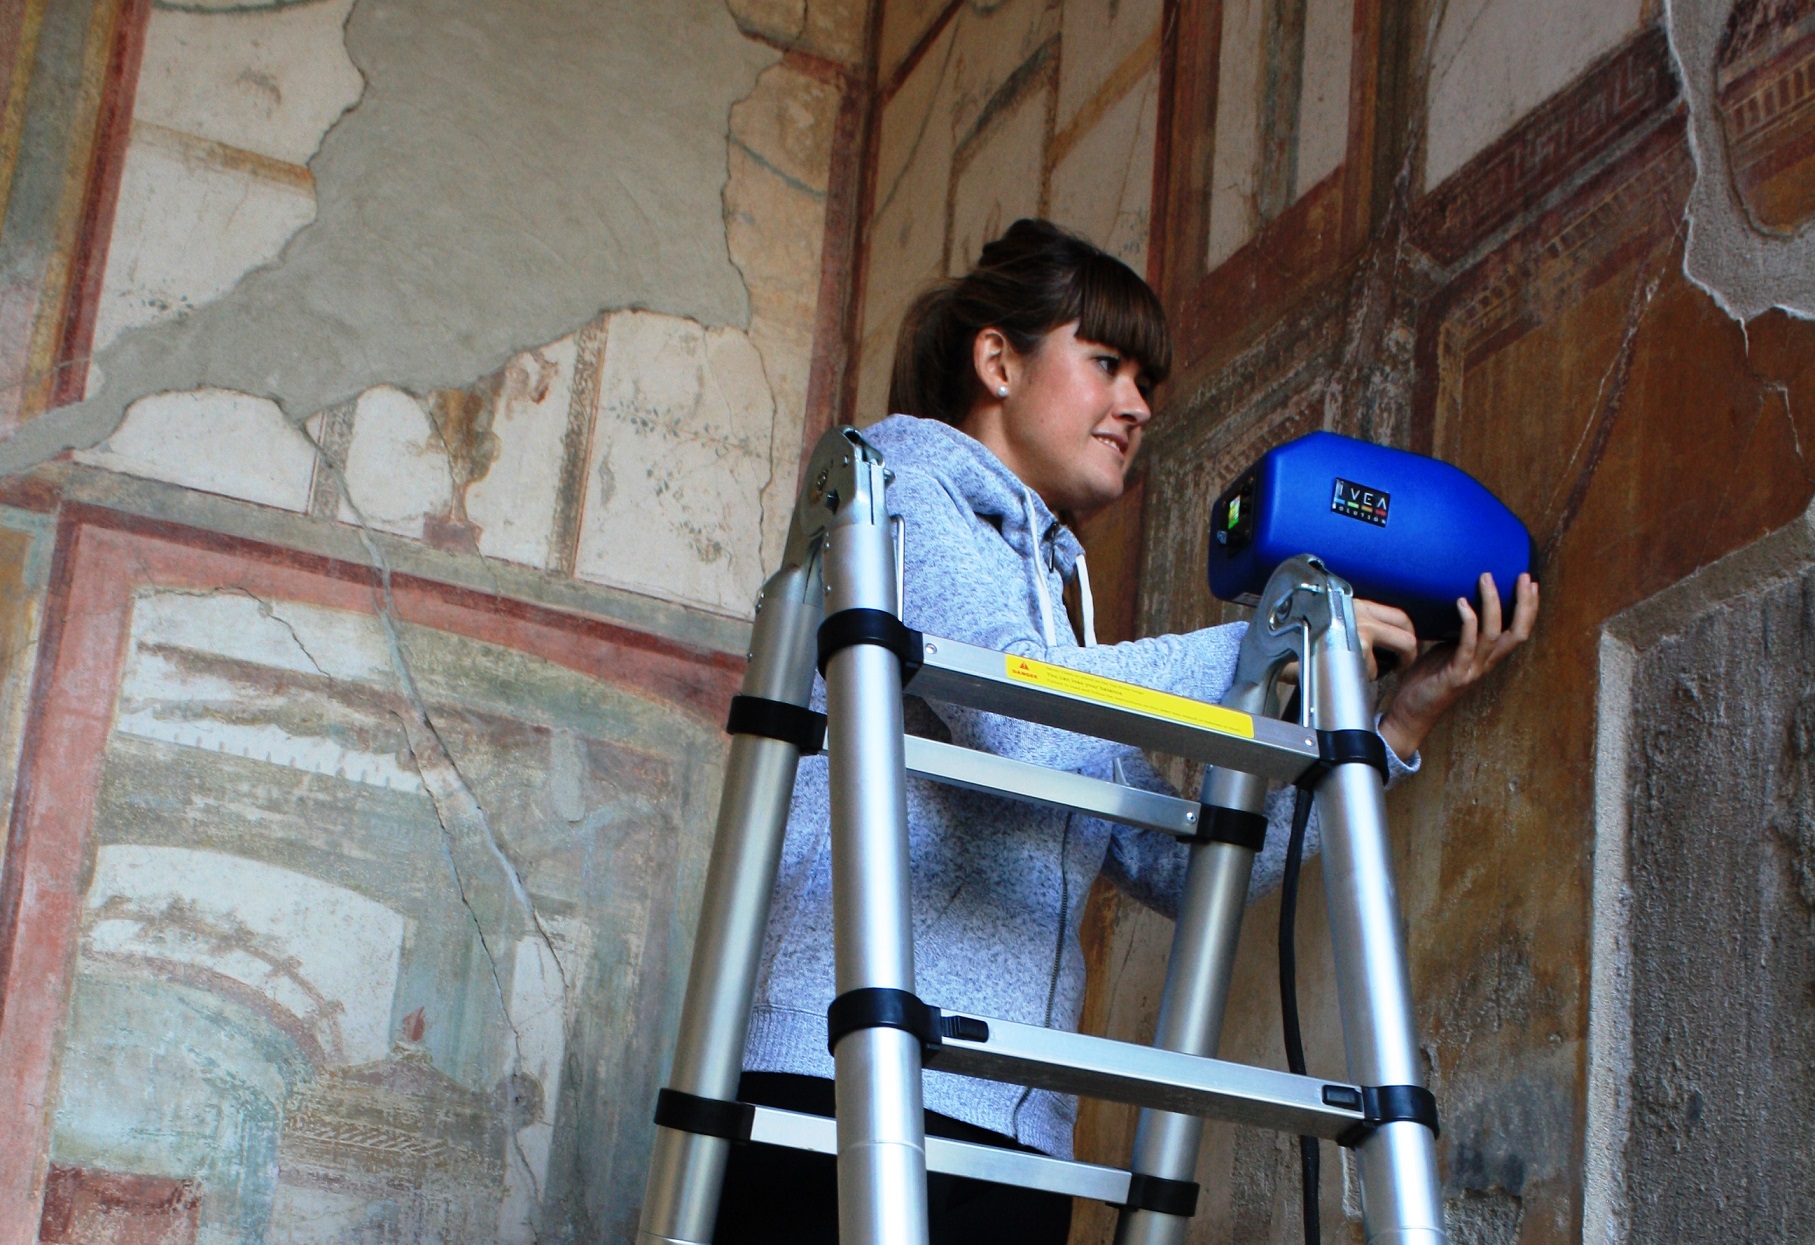 Maite Maguregui of the IBeA group taking measurements in the mural paintings of Pompeii using portable tools